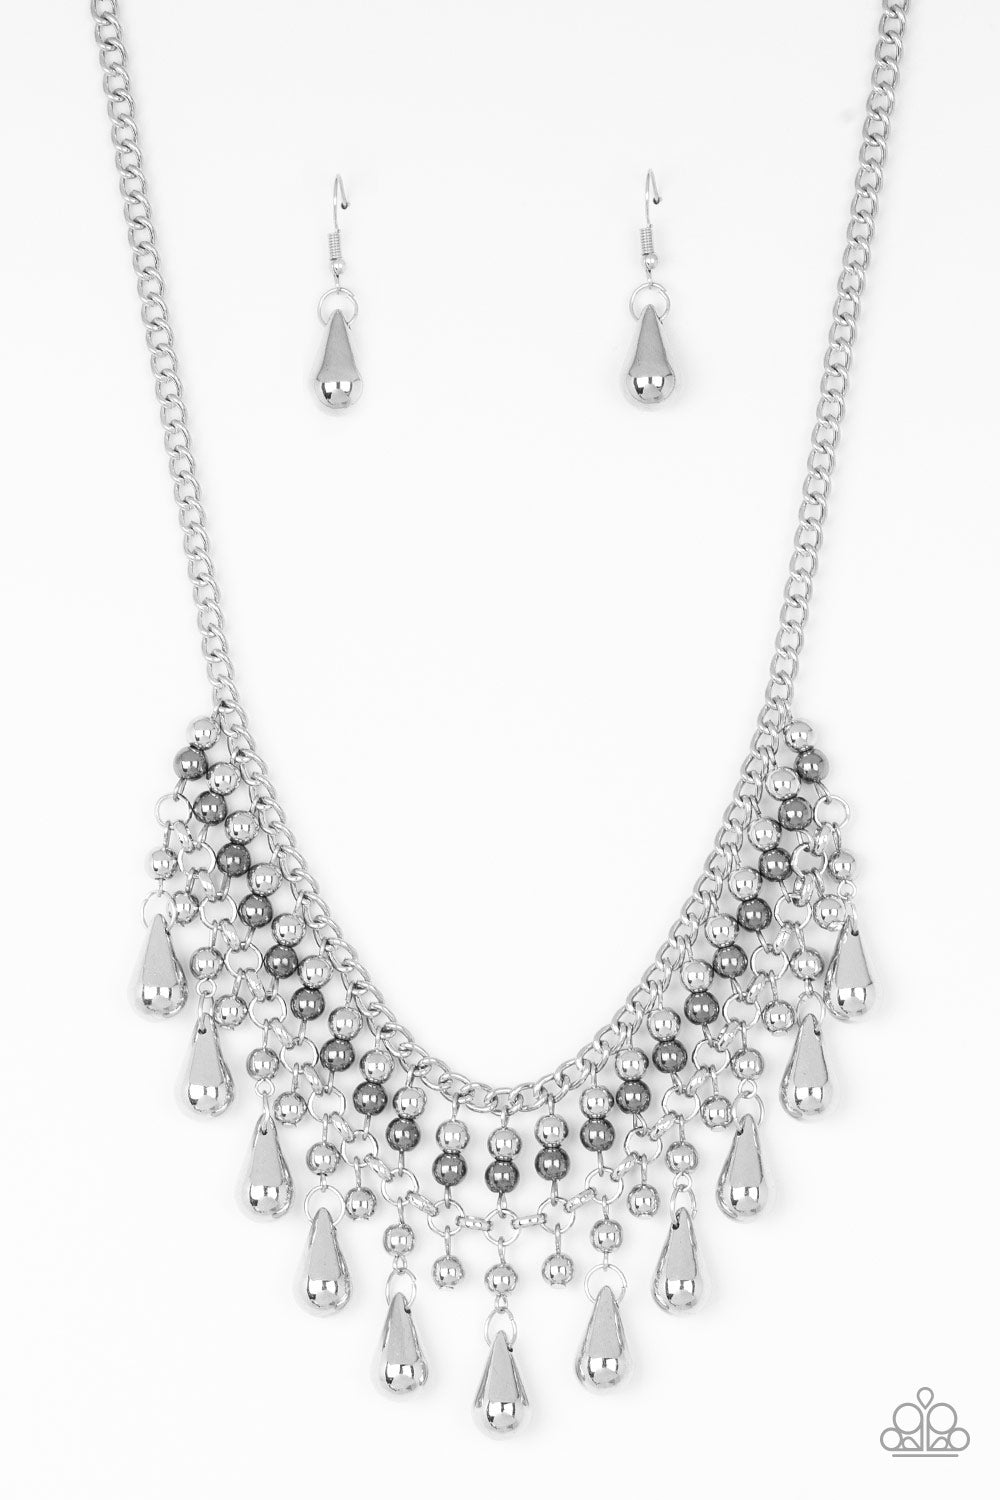 Dont Forget To BOSS! - Silver/Gunmetal necklace